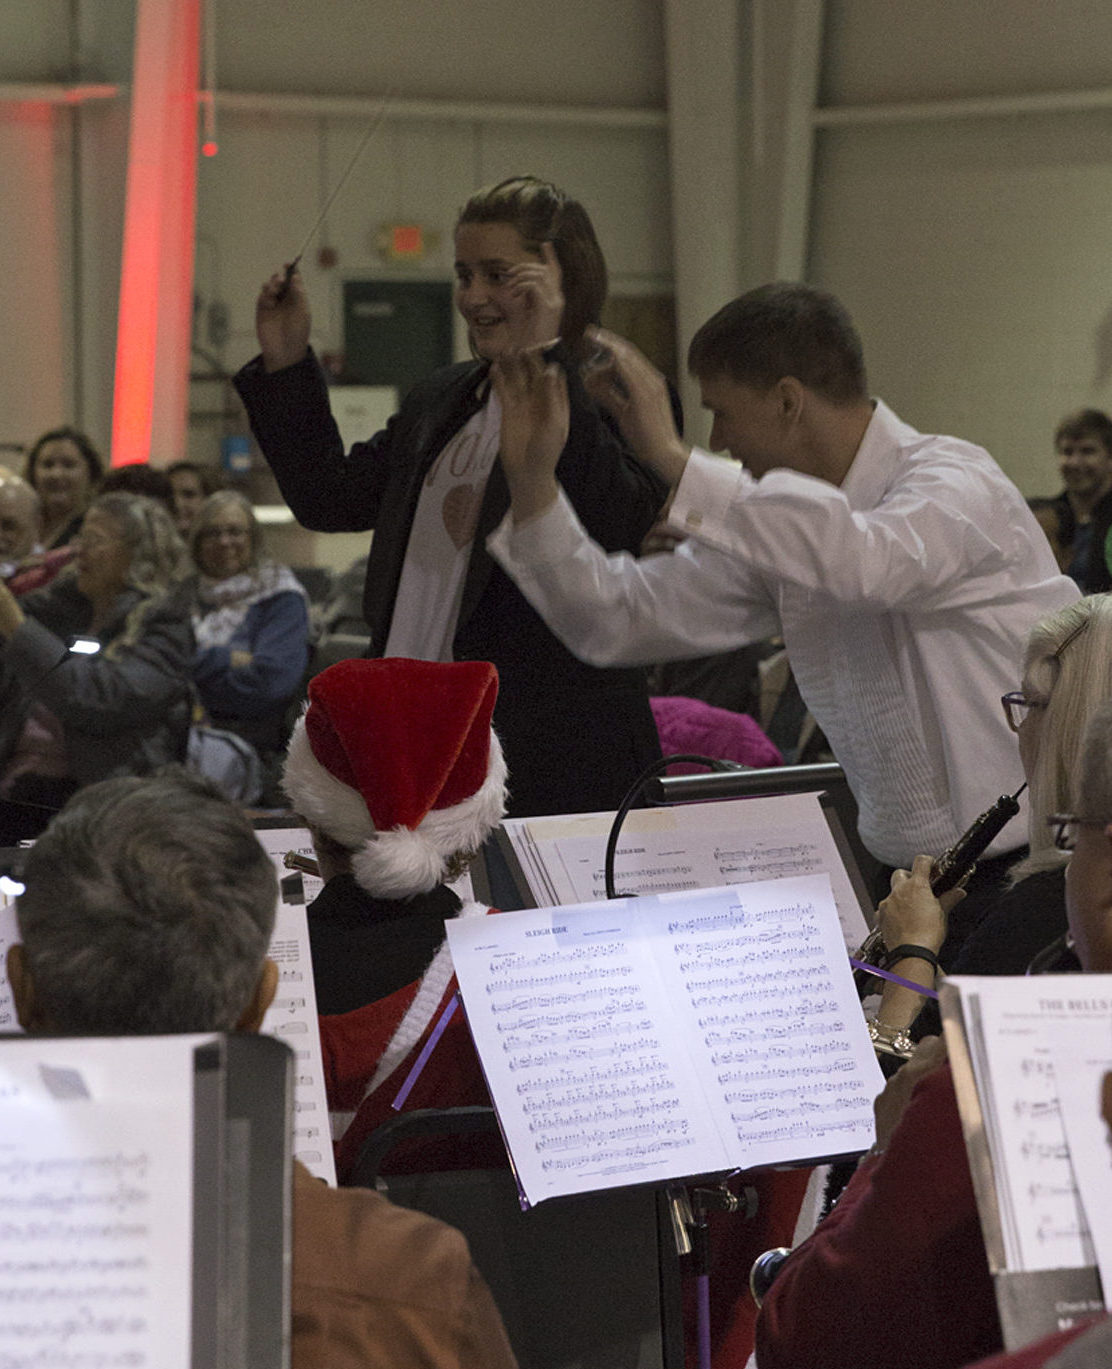 Symphonic Artistry - Holiday Hanger Concert - James Caliva Conducting